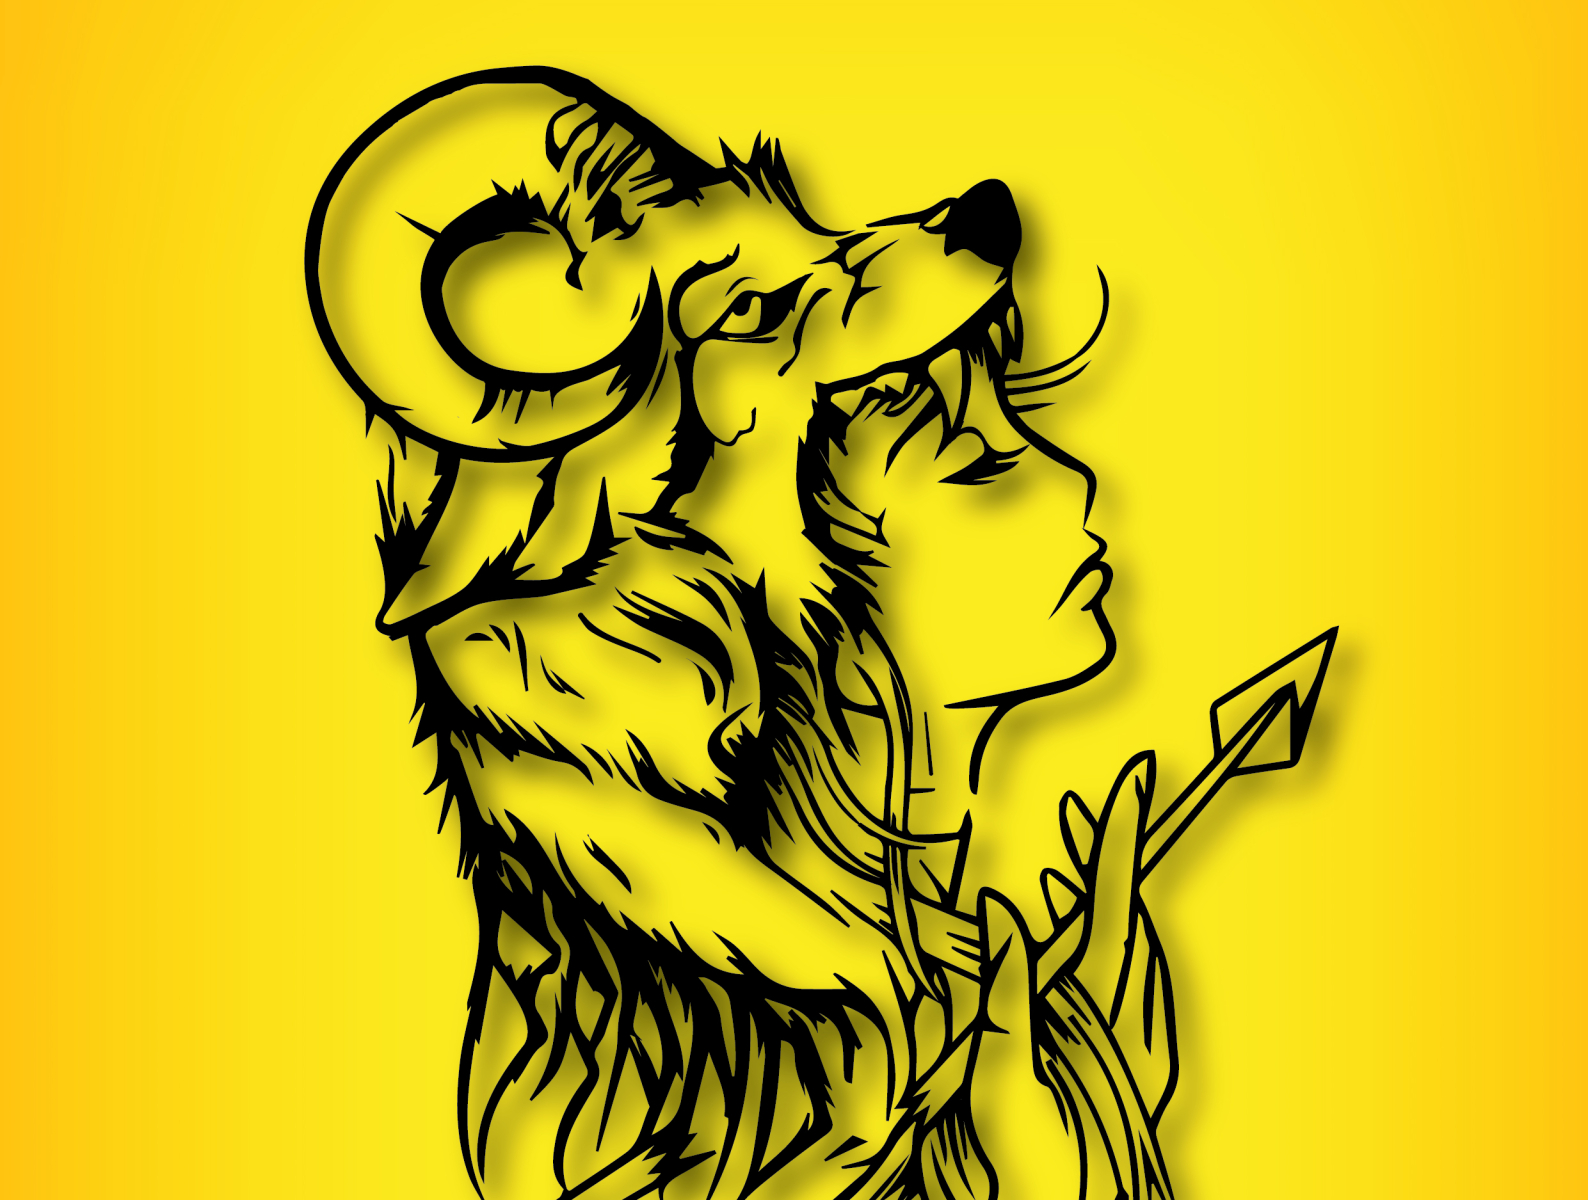 Download Valkyrie Png Image With No  Norse Mythology Valkyrie Symbol Tattoo Valkyrie Png  free transparent png images  pngaaacom